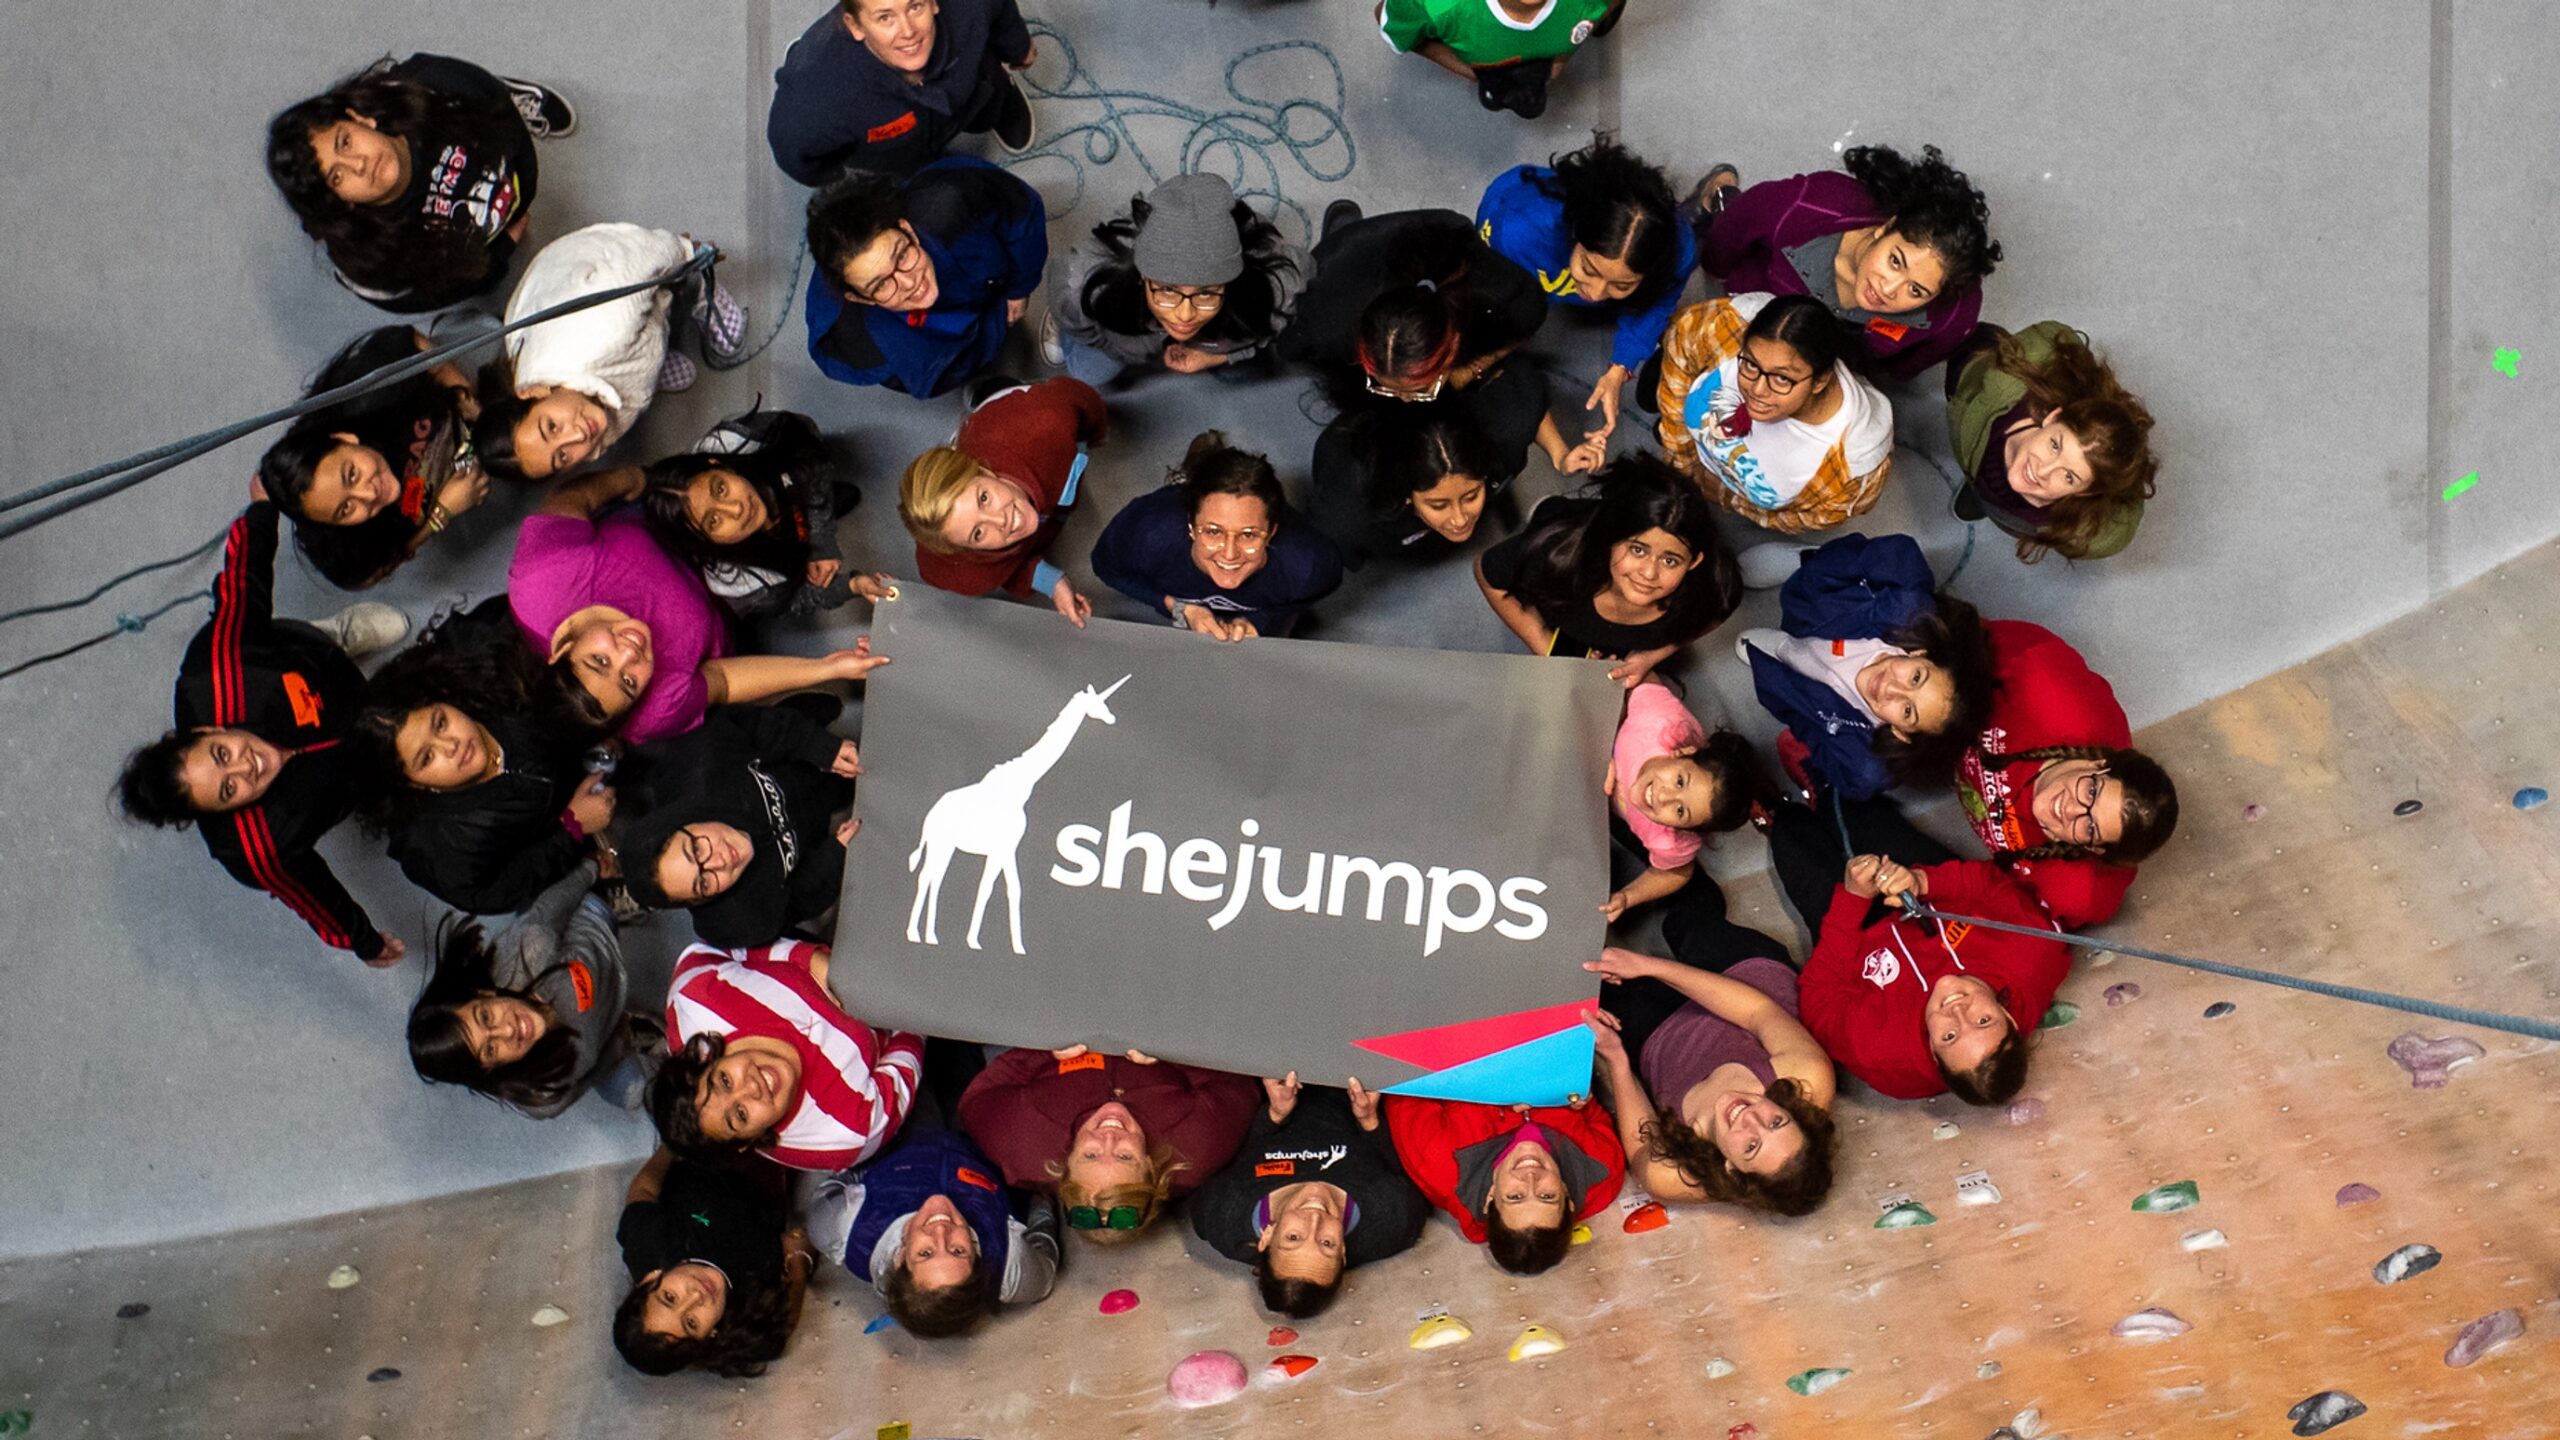 a diverse group of women and girls hold a sign that says "shejumps"